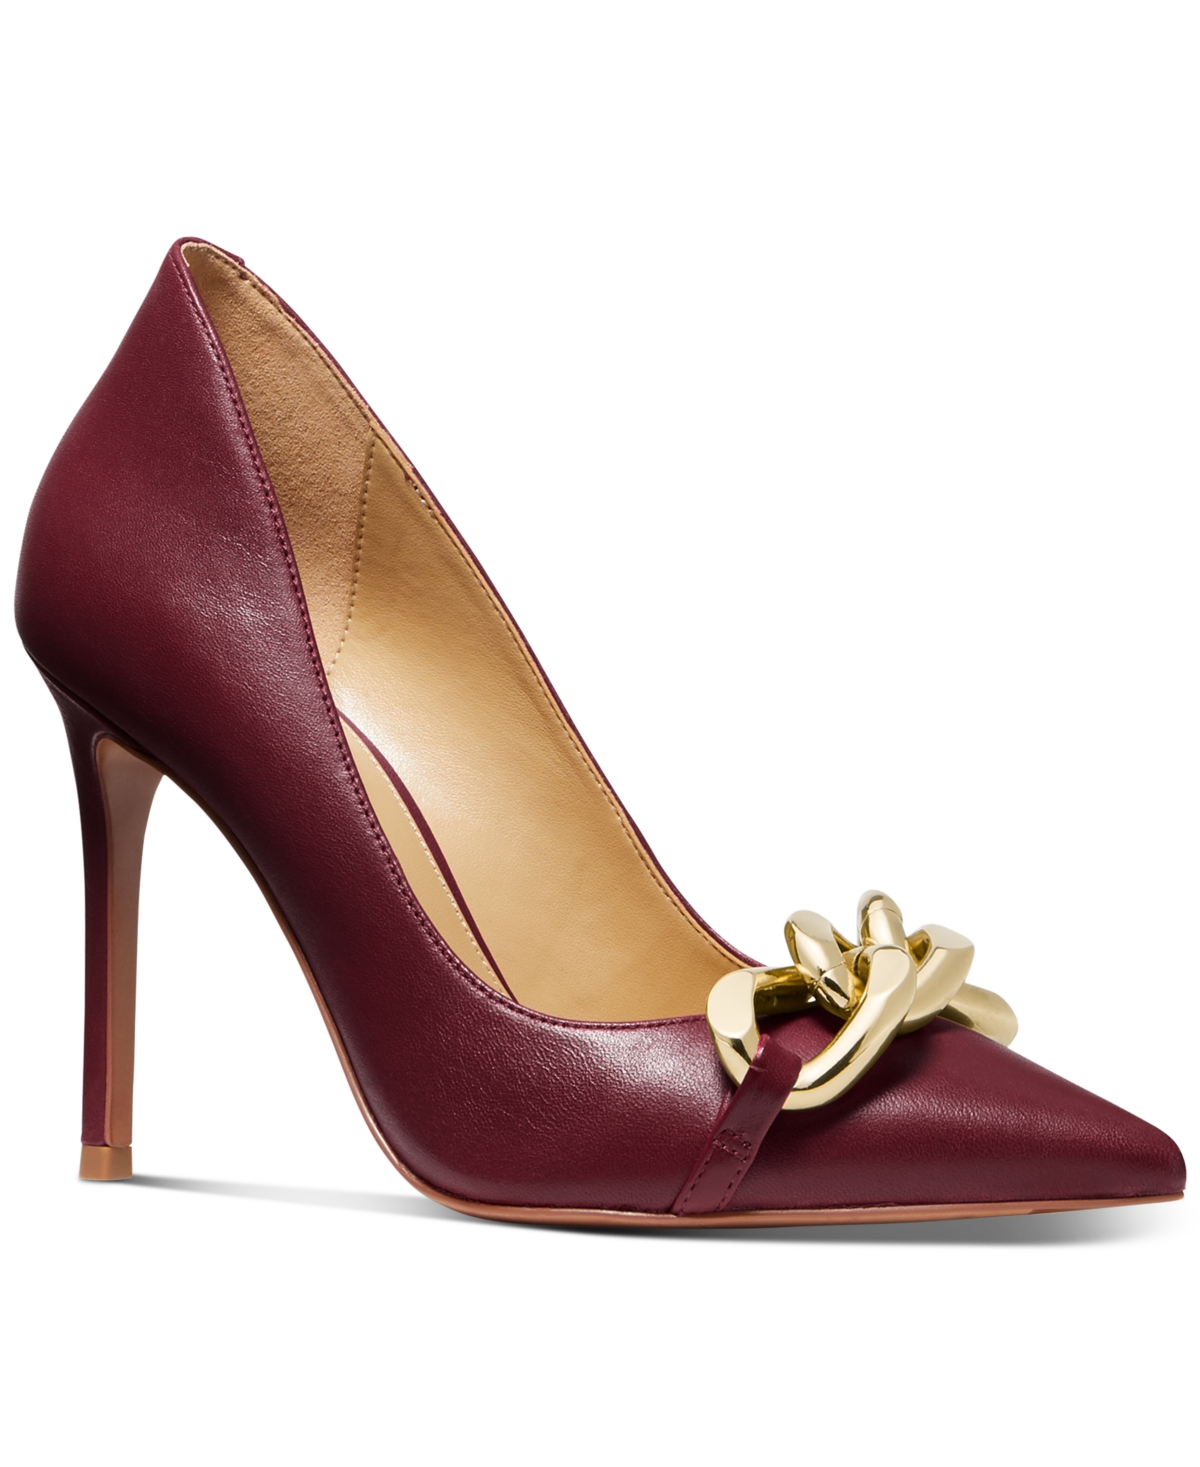 UPC 195512620898 product image for Michael Michael Kors Women's Scarlett Pointed-Toe Chain Pumps Women's Shoes | upcitemdb.com